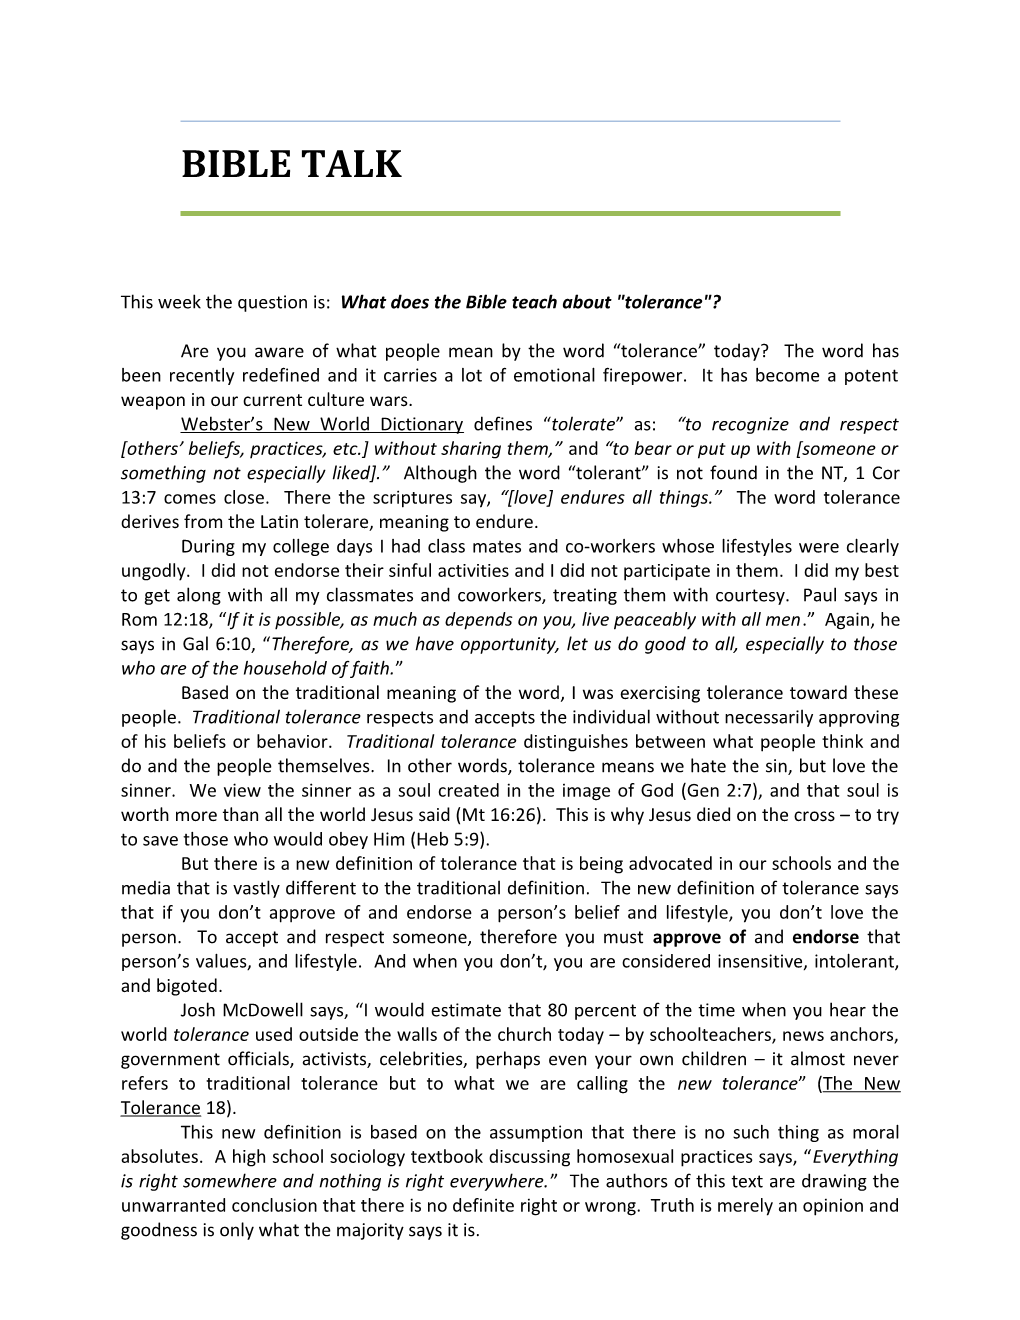 This Week the Question Is: What Does the Bible Teach About Tolerance ?